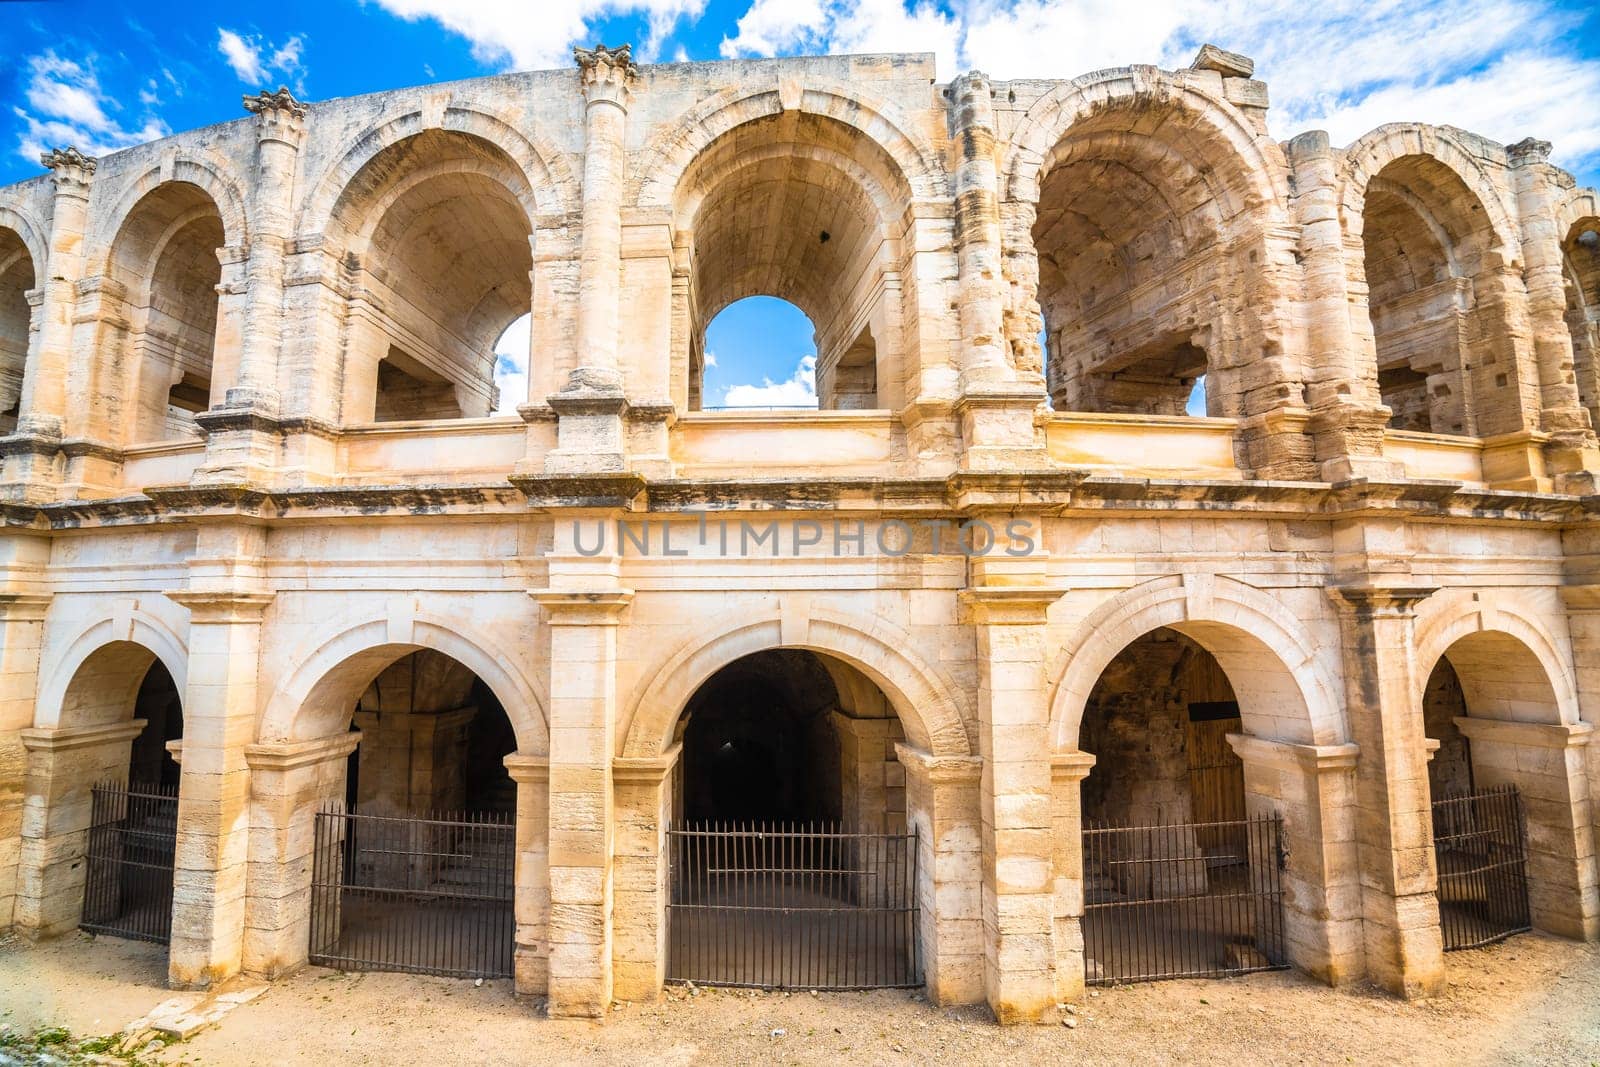 Arles Amphitheatre historic architecture view, South of France